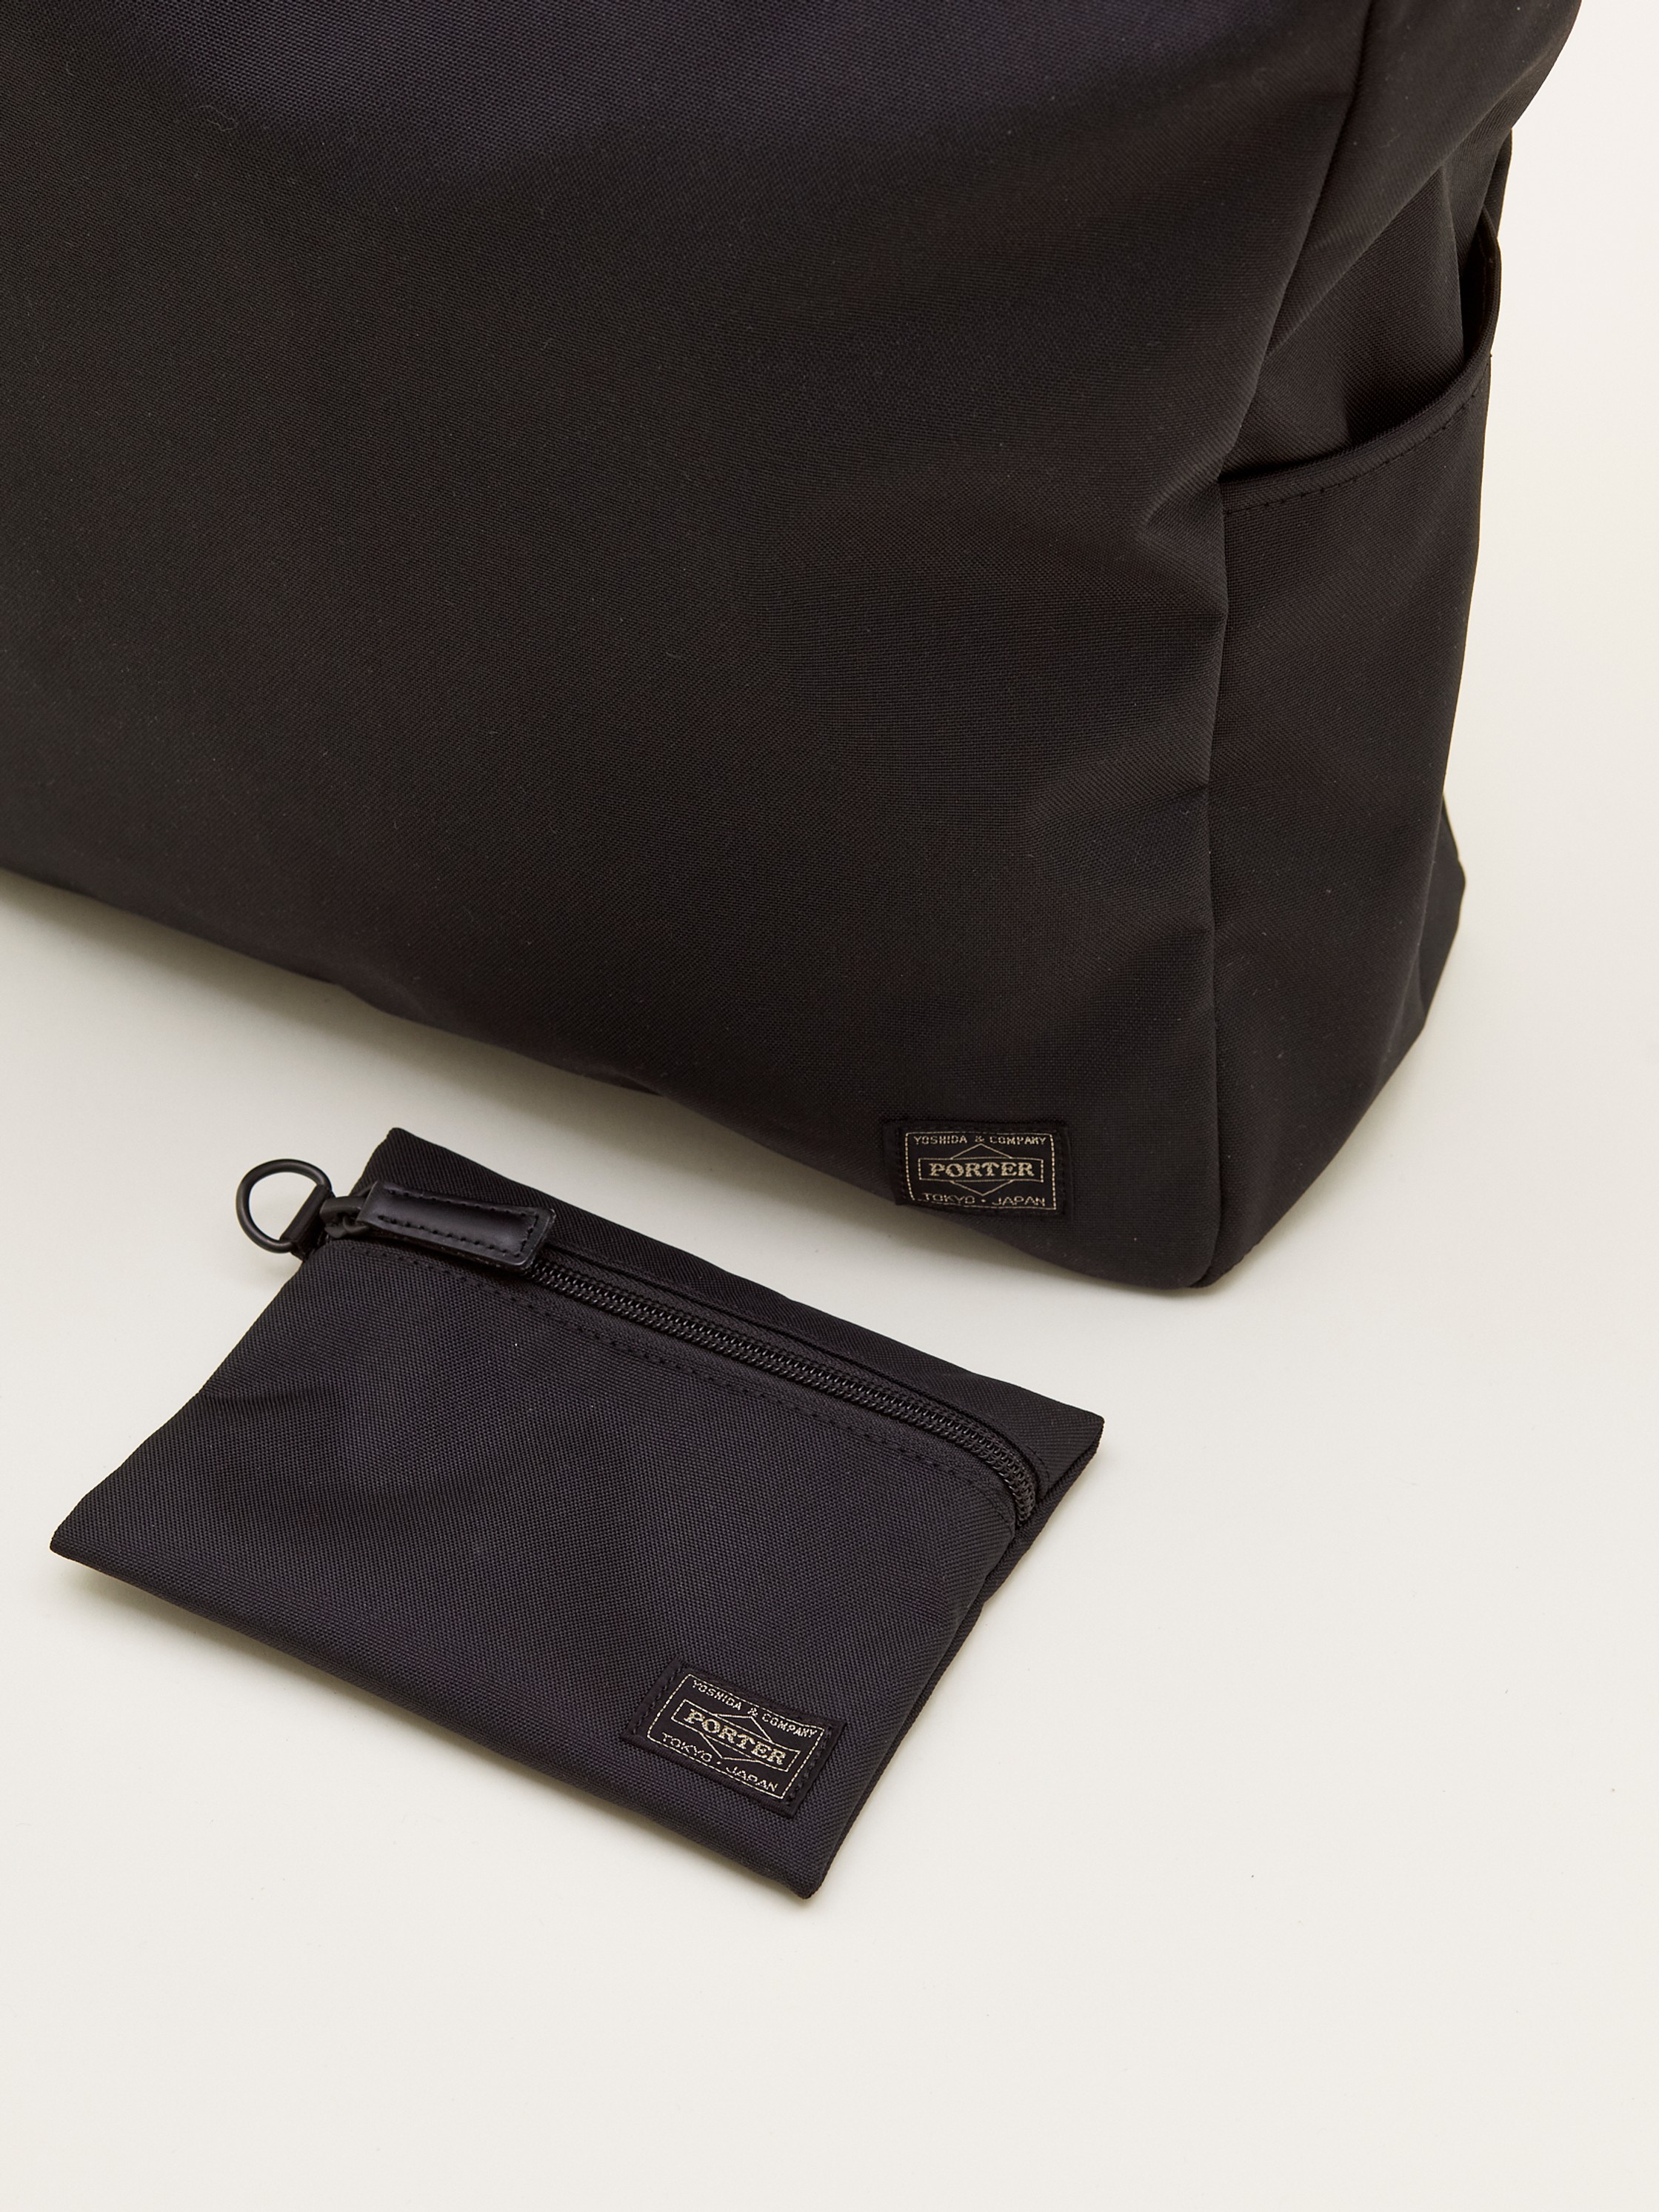 Zip tote with pouch - Porter - Bags - Shop | Monocle